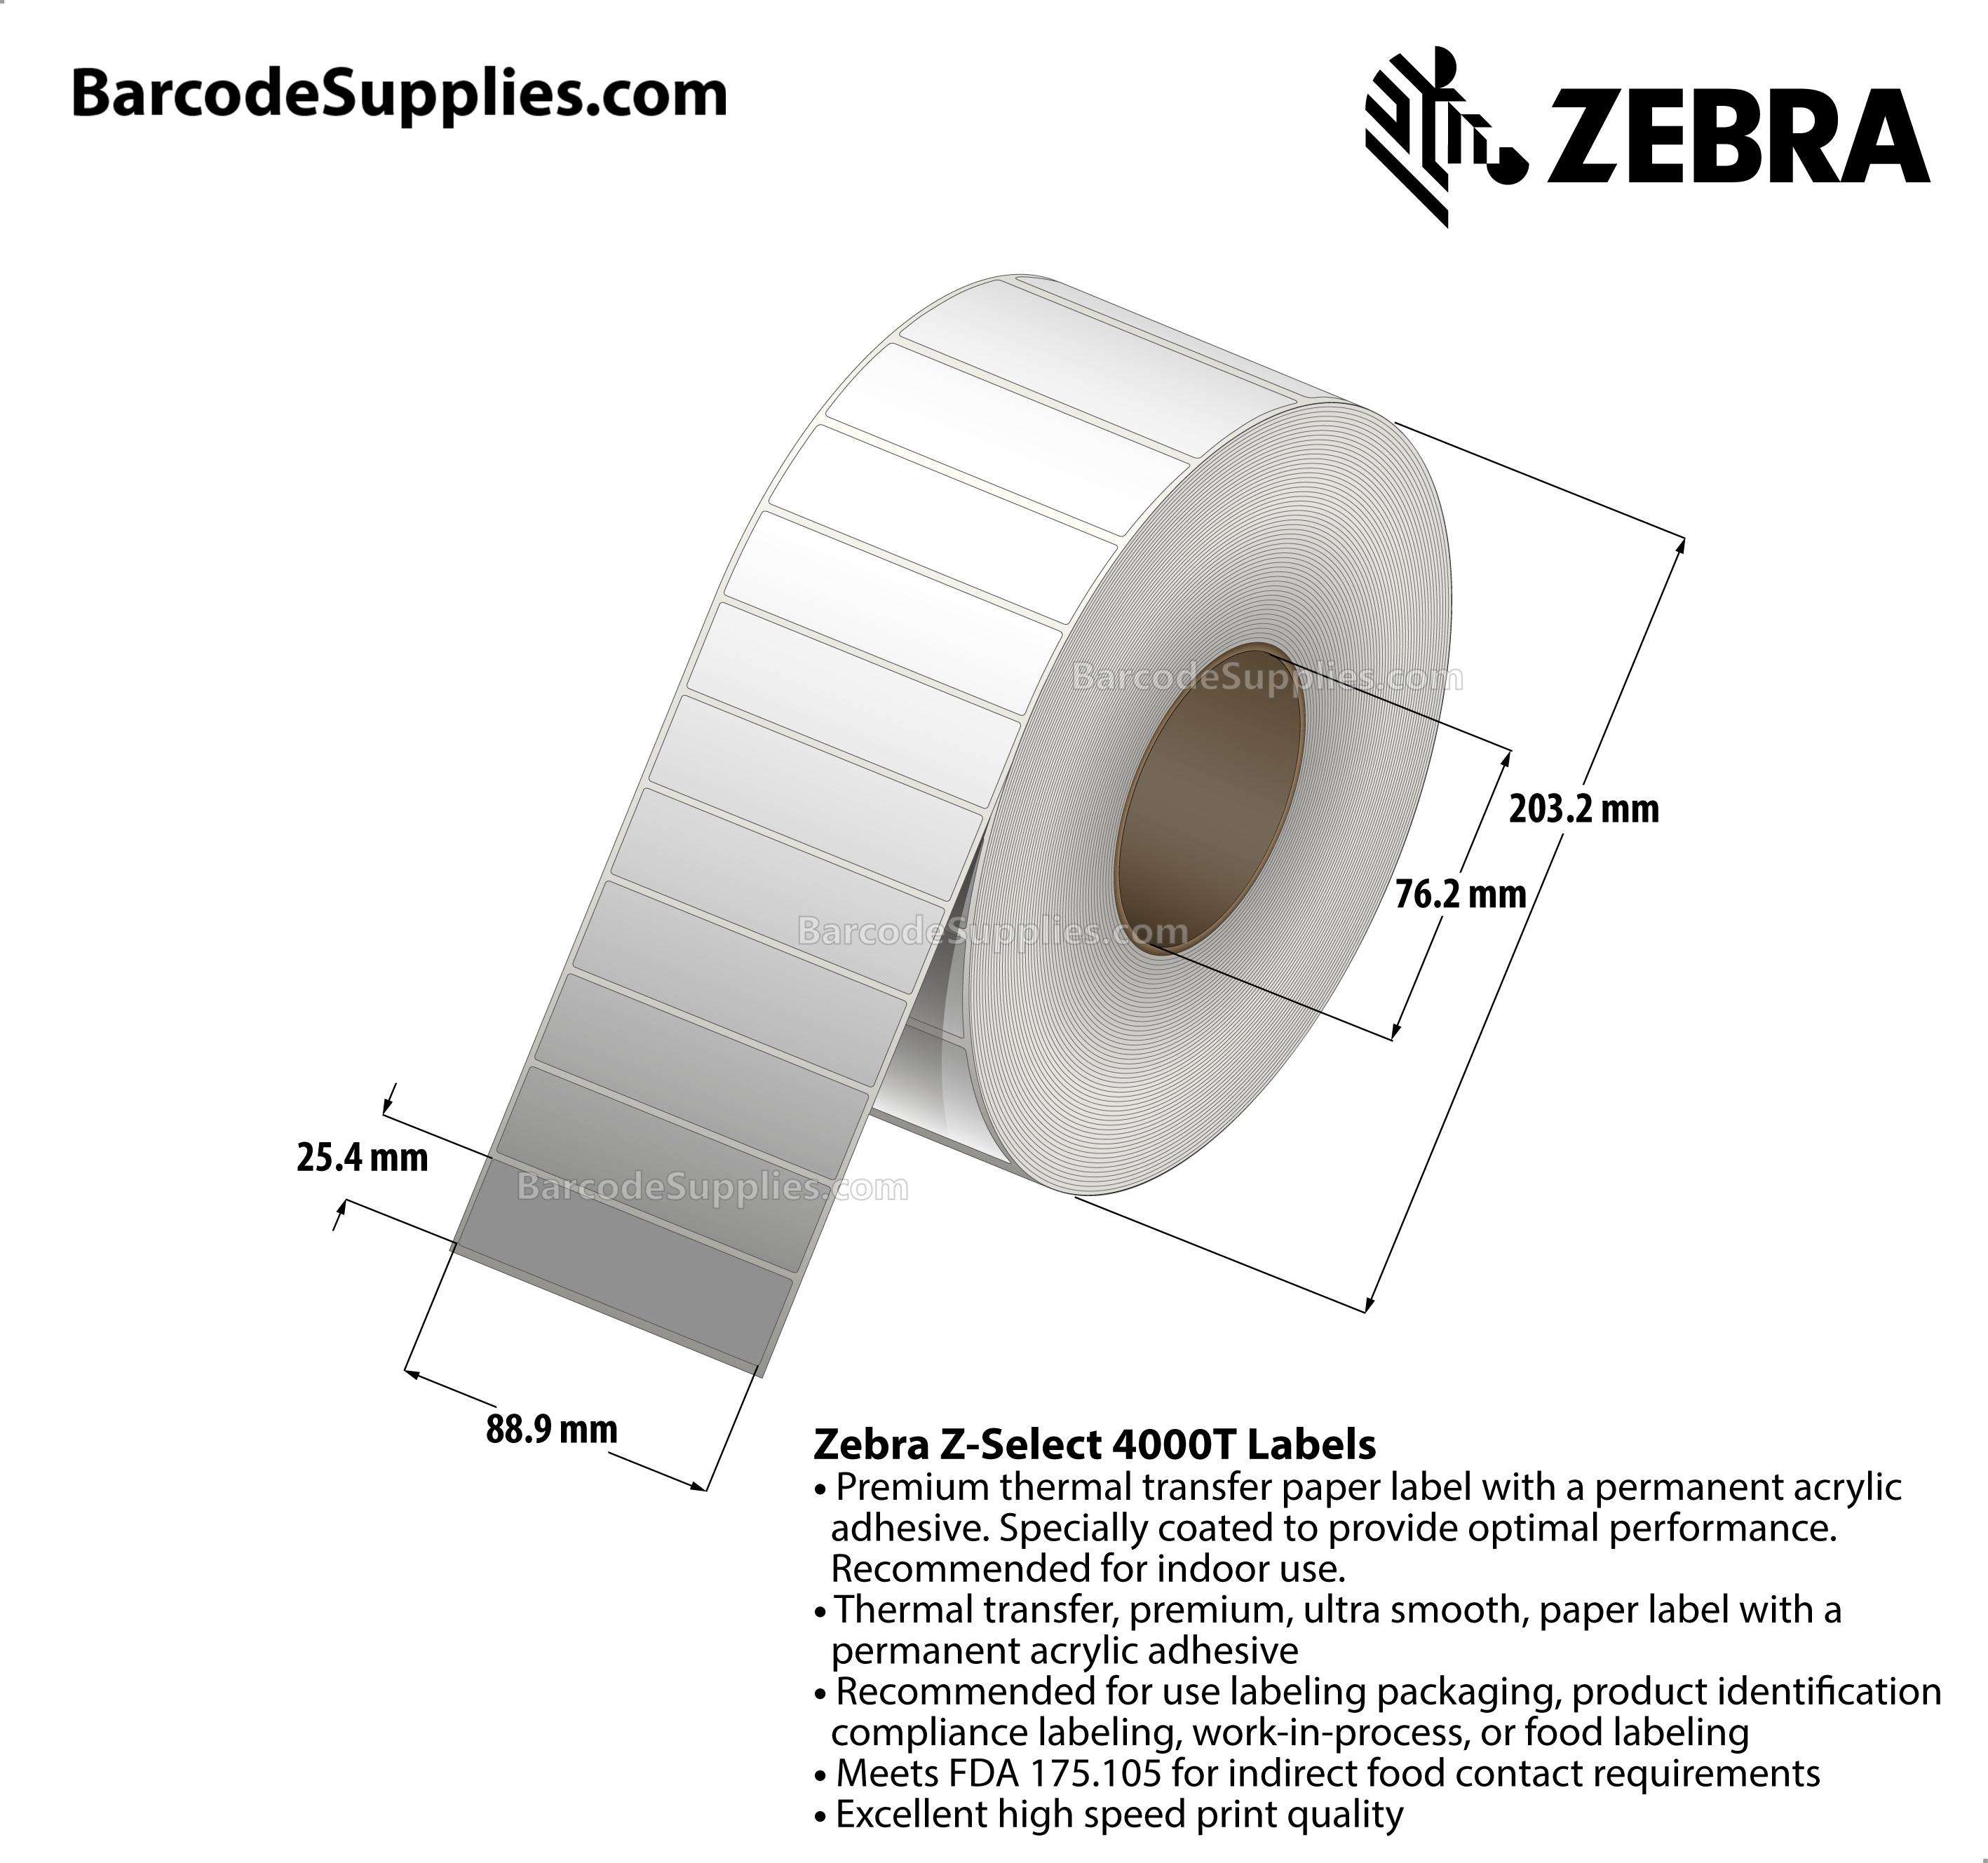 3.5 x 1 Thermal Transfer White Z-Select 4000T Labels With Permanent Adhesive - Not Perforated - 5180 Labels Per Roll - Carton Of 6 Rolls - 31080 Labels Total - MPN: 72288